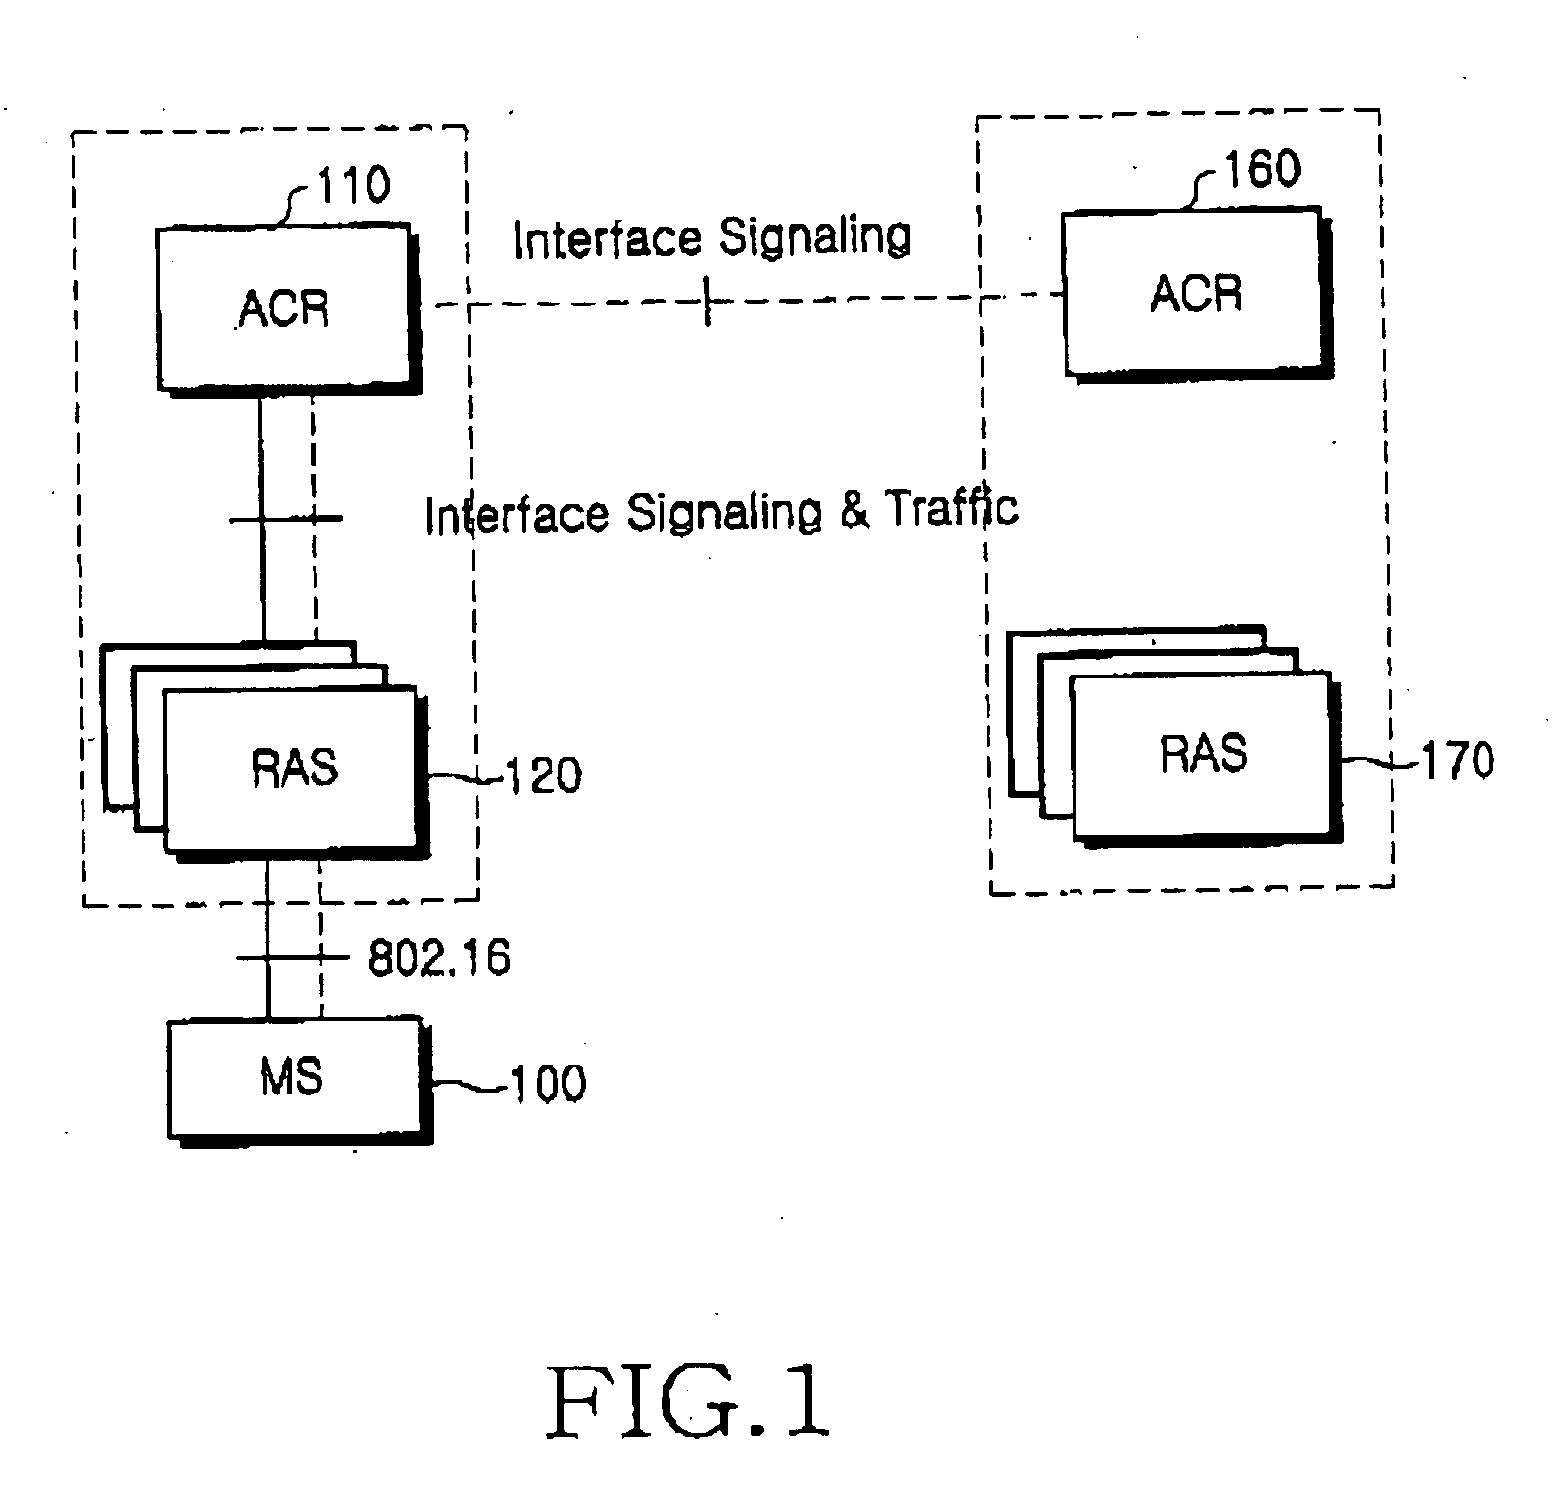 Handover method in a wireless communication system